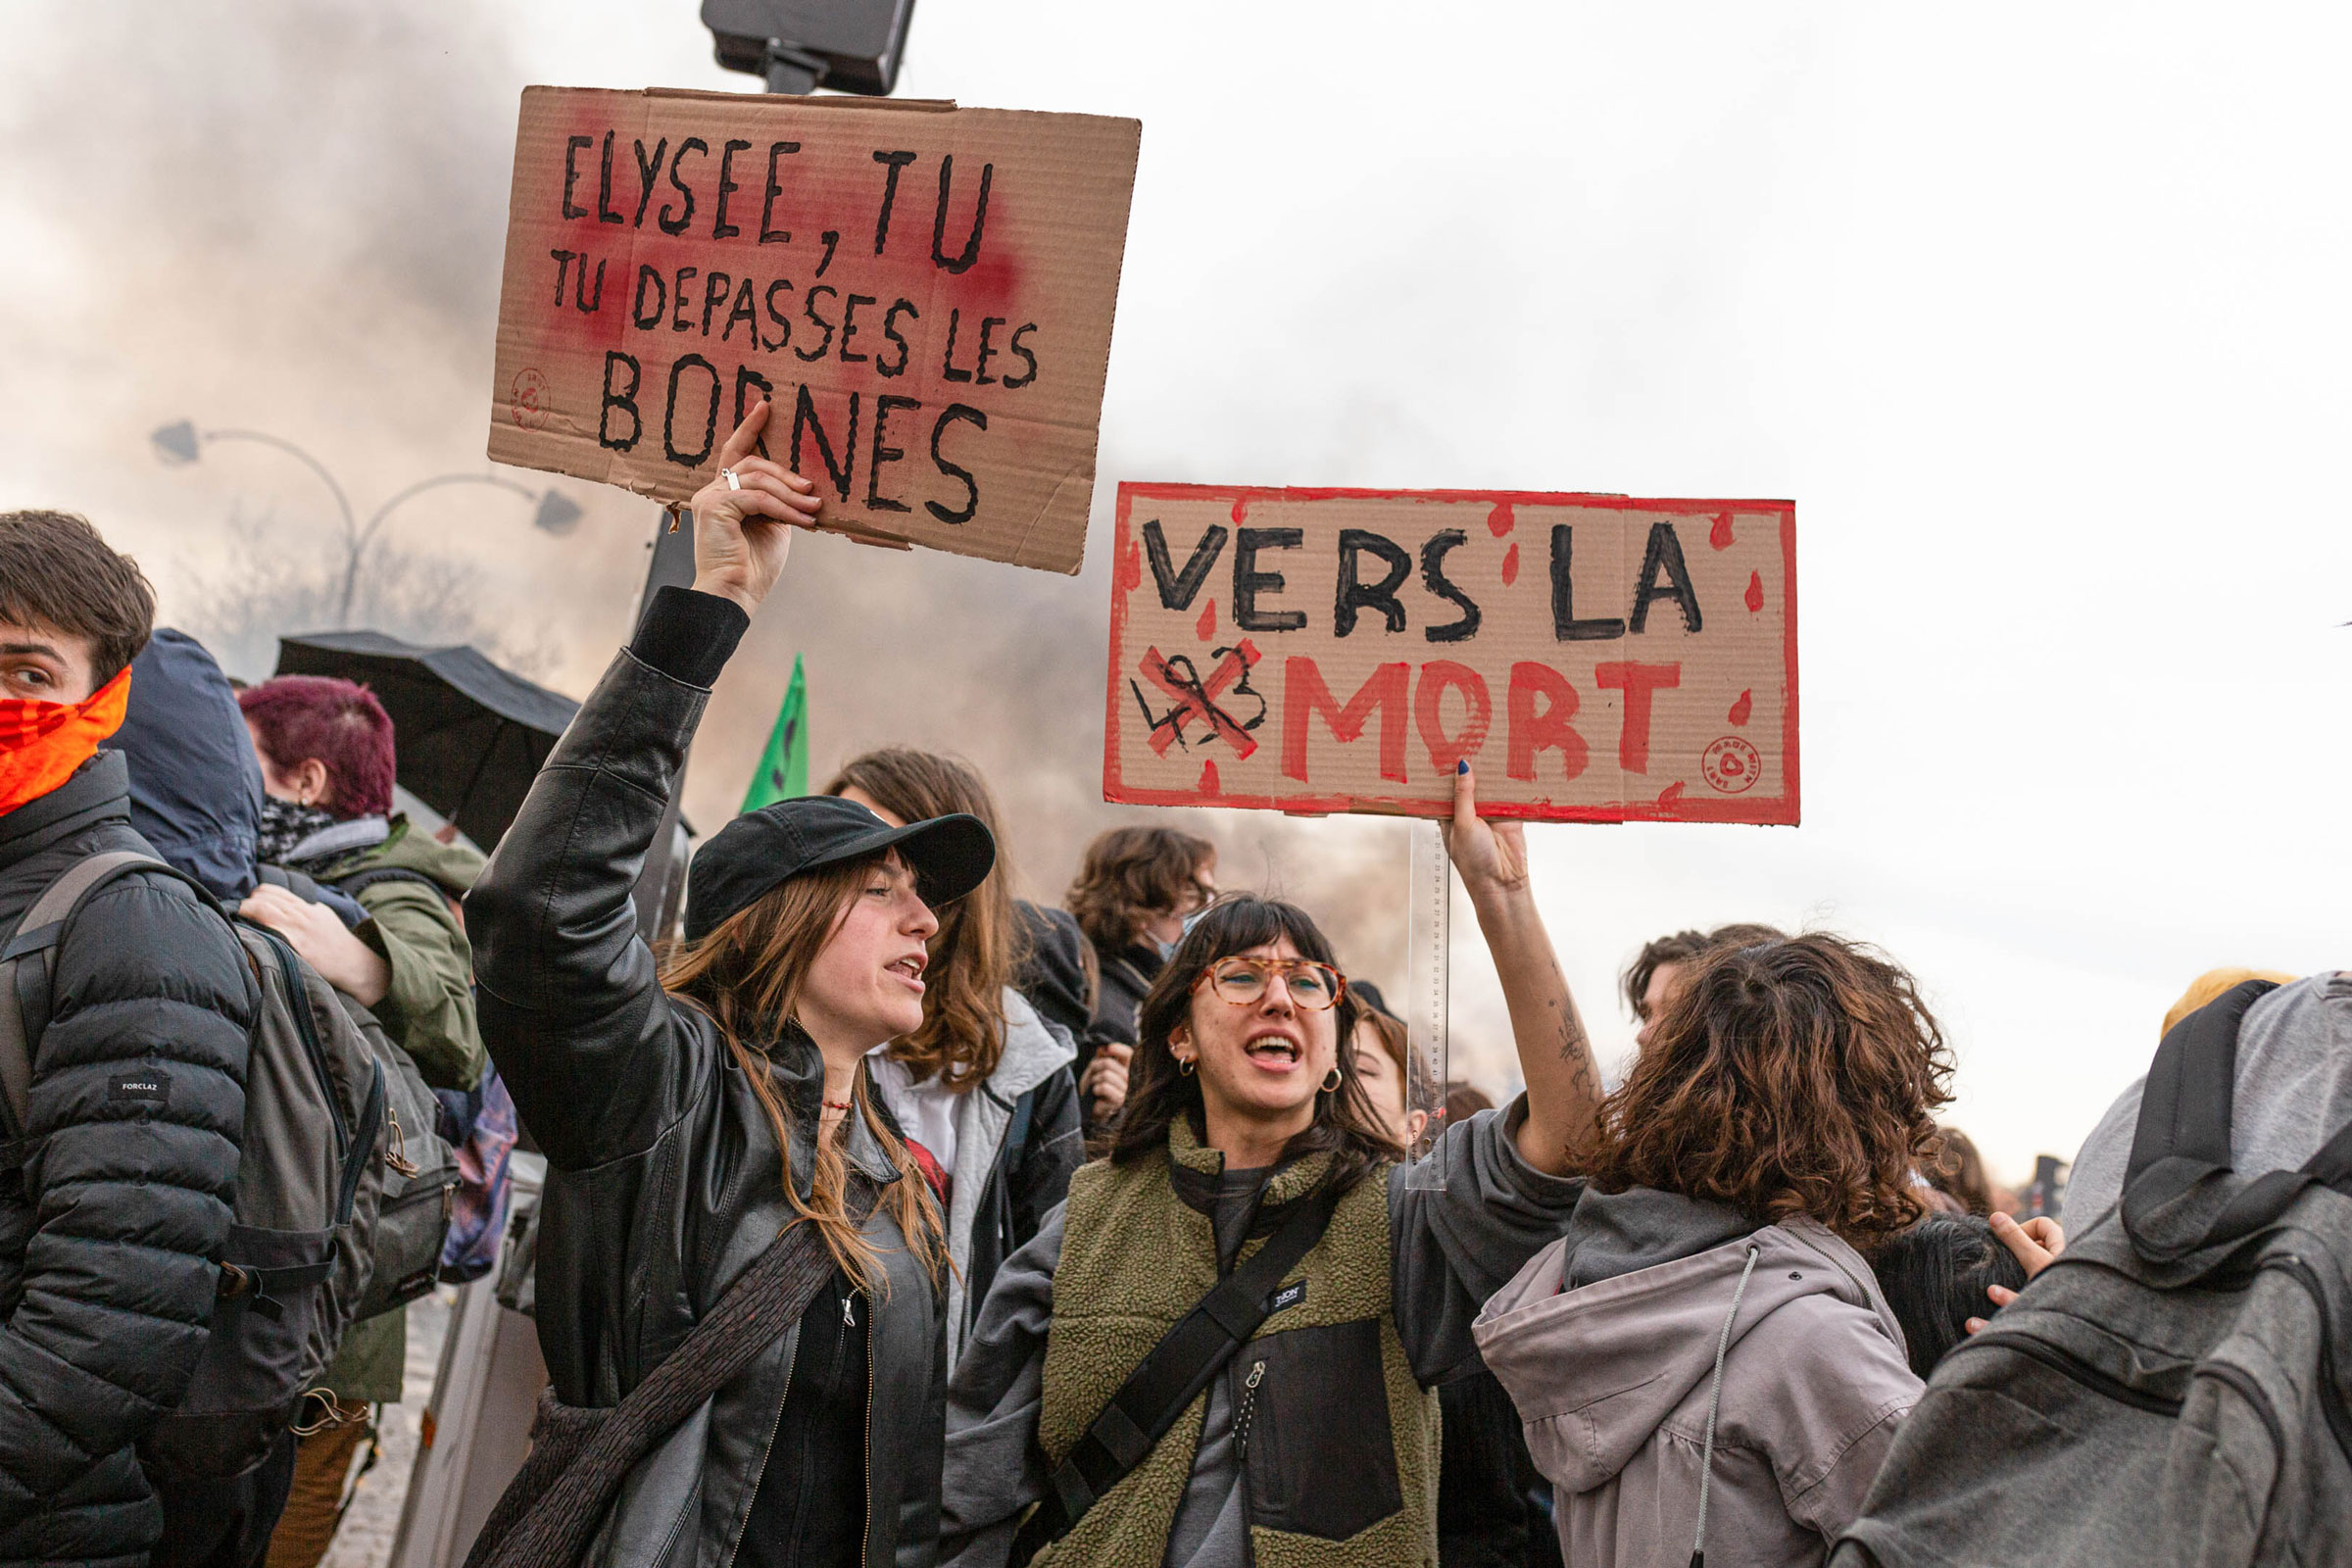 Protesters hold placards during a demonstration at the Place de la Concorde in Paris on March 16, 2023. (Telmo Pinto—SOPA Images/LightRocket/Getty Images)